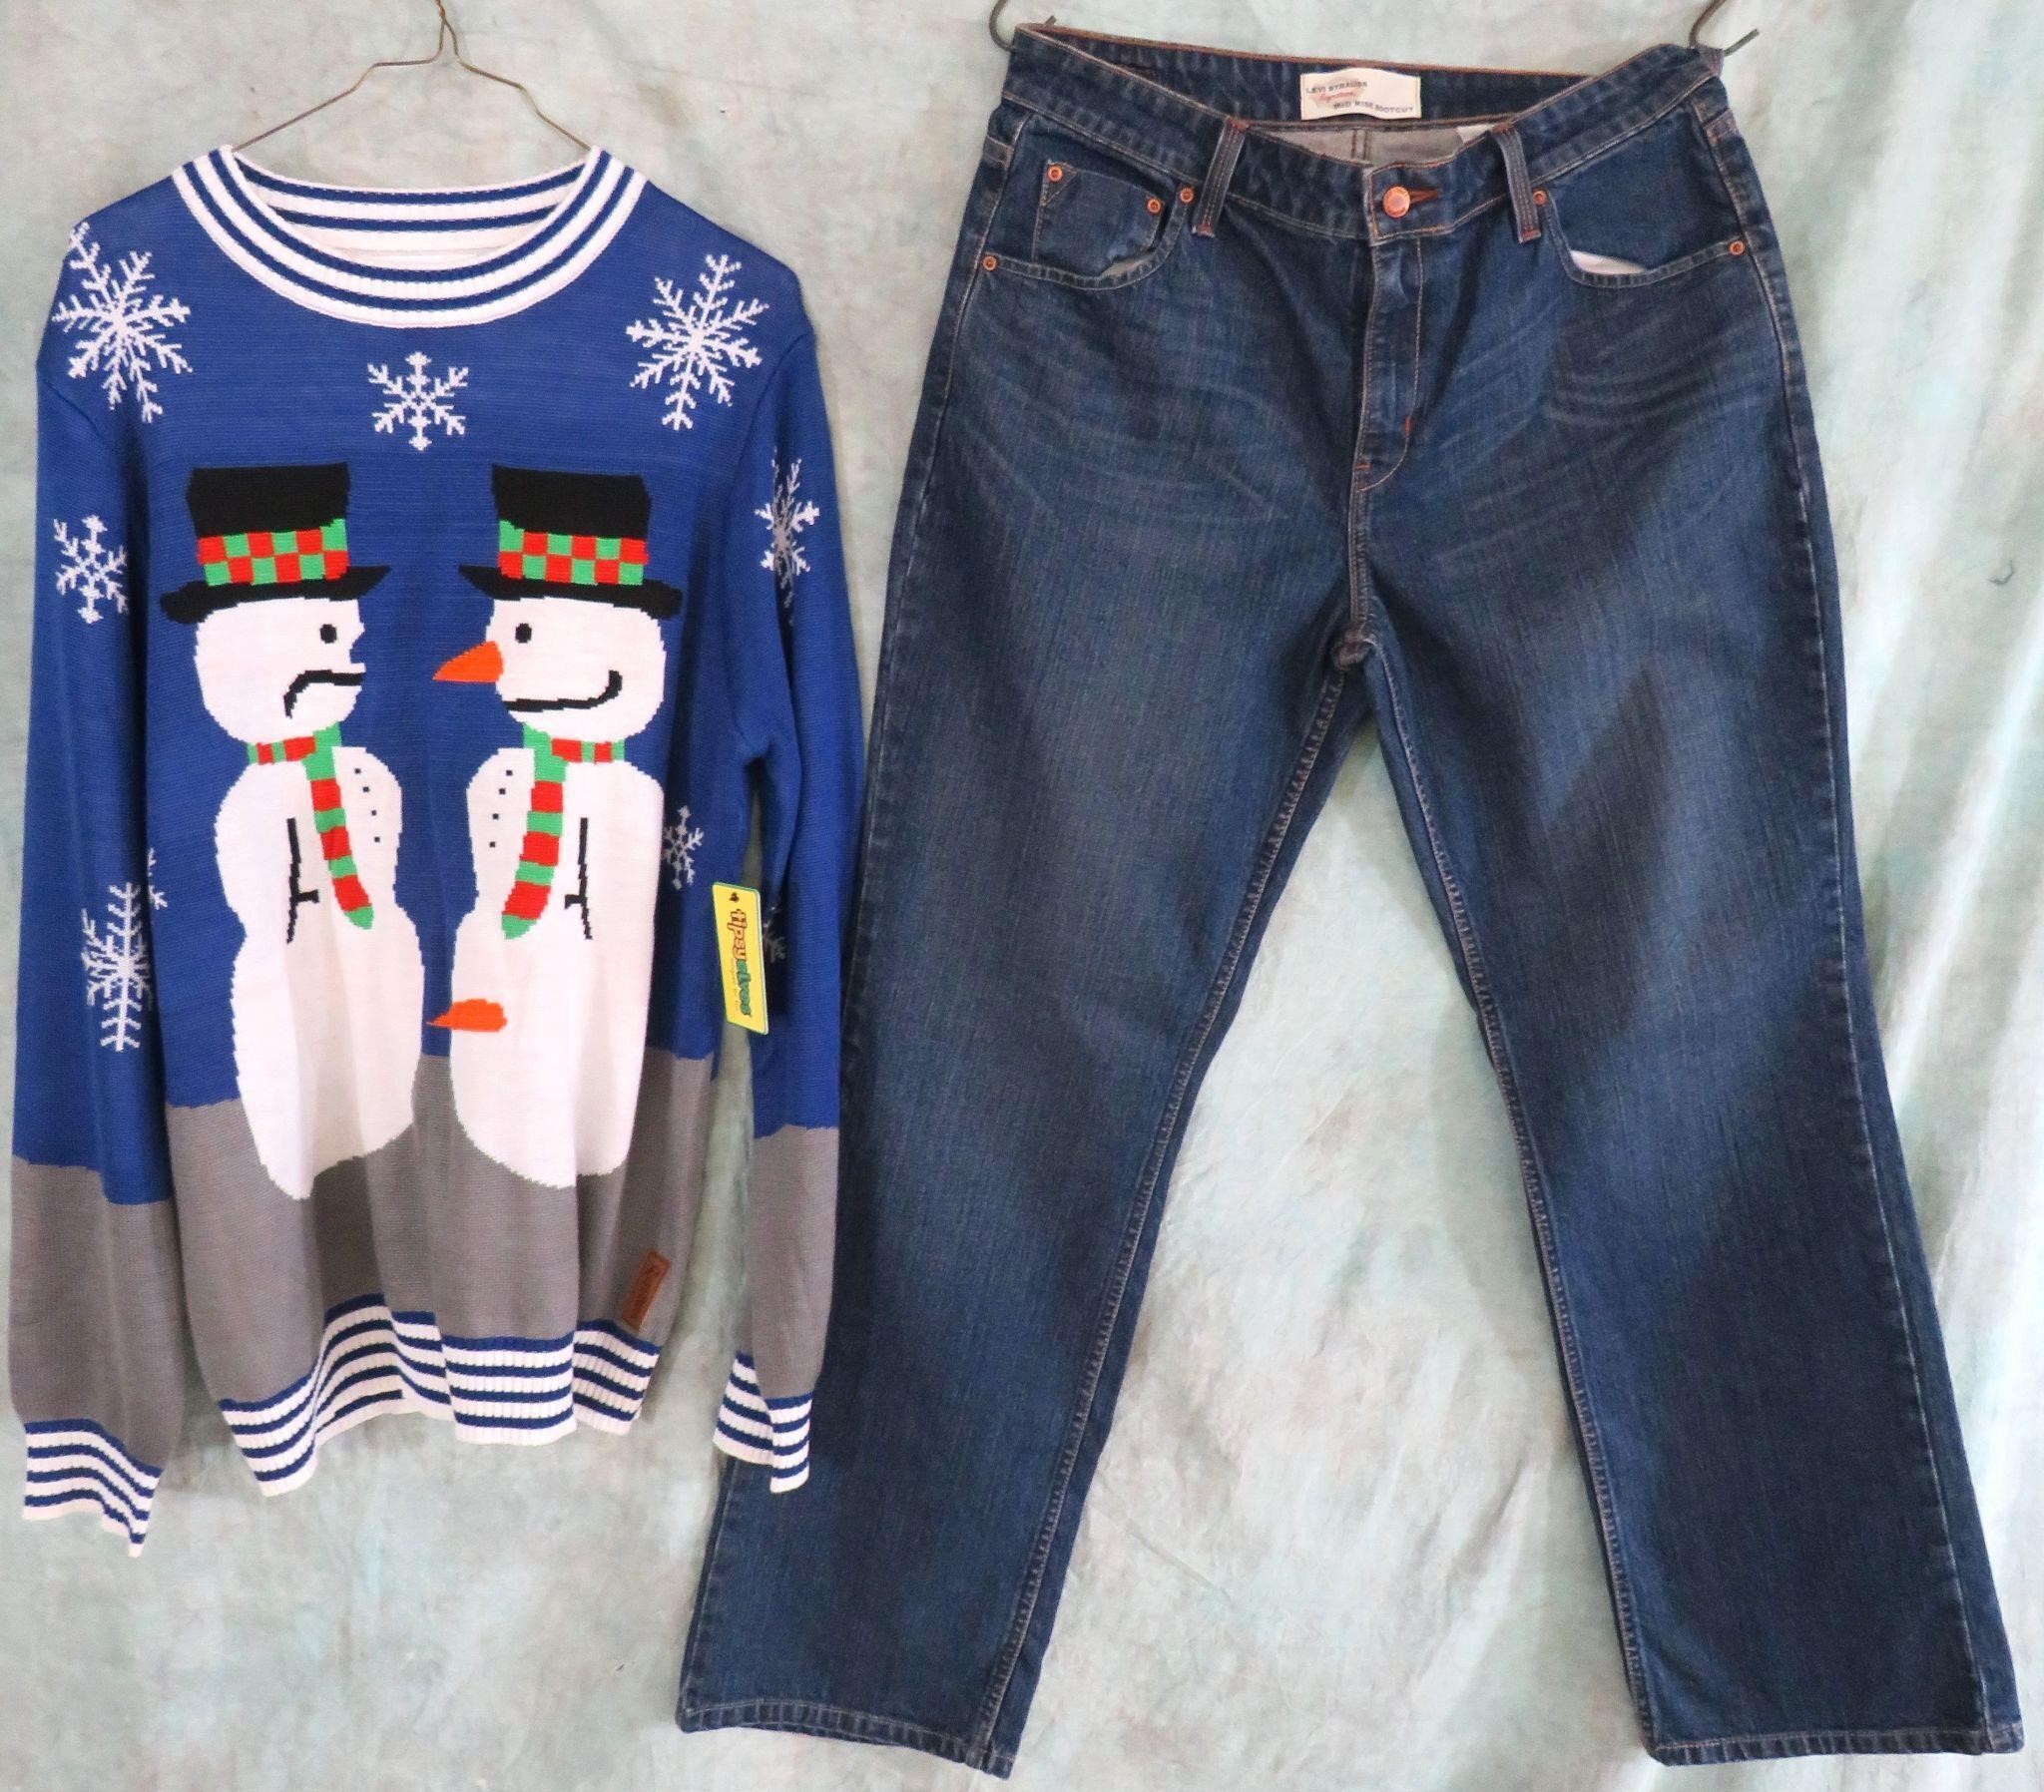 WOMANS LEVI STRAUSS JEANS & CHRISTMAS SWEATER